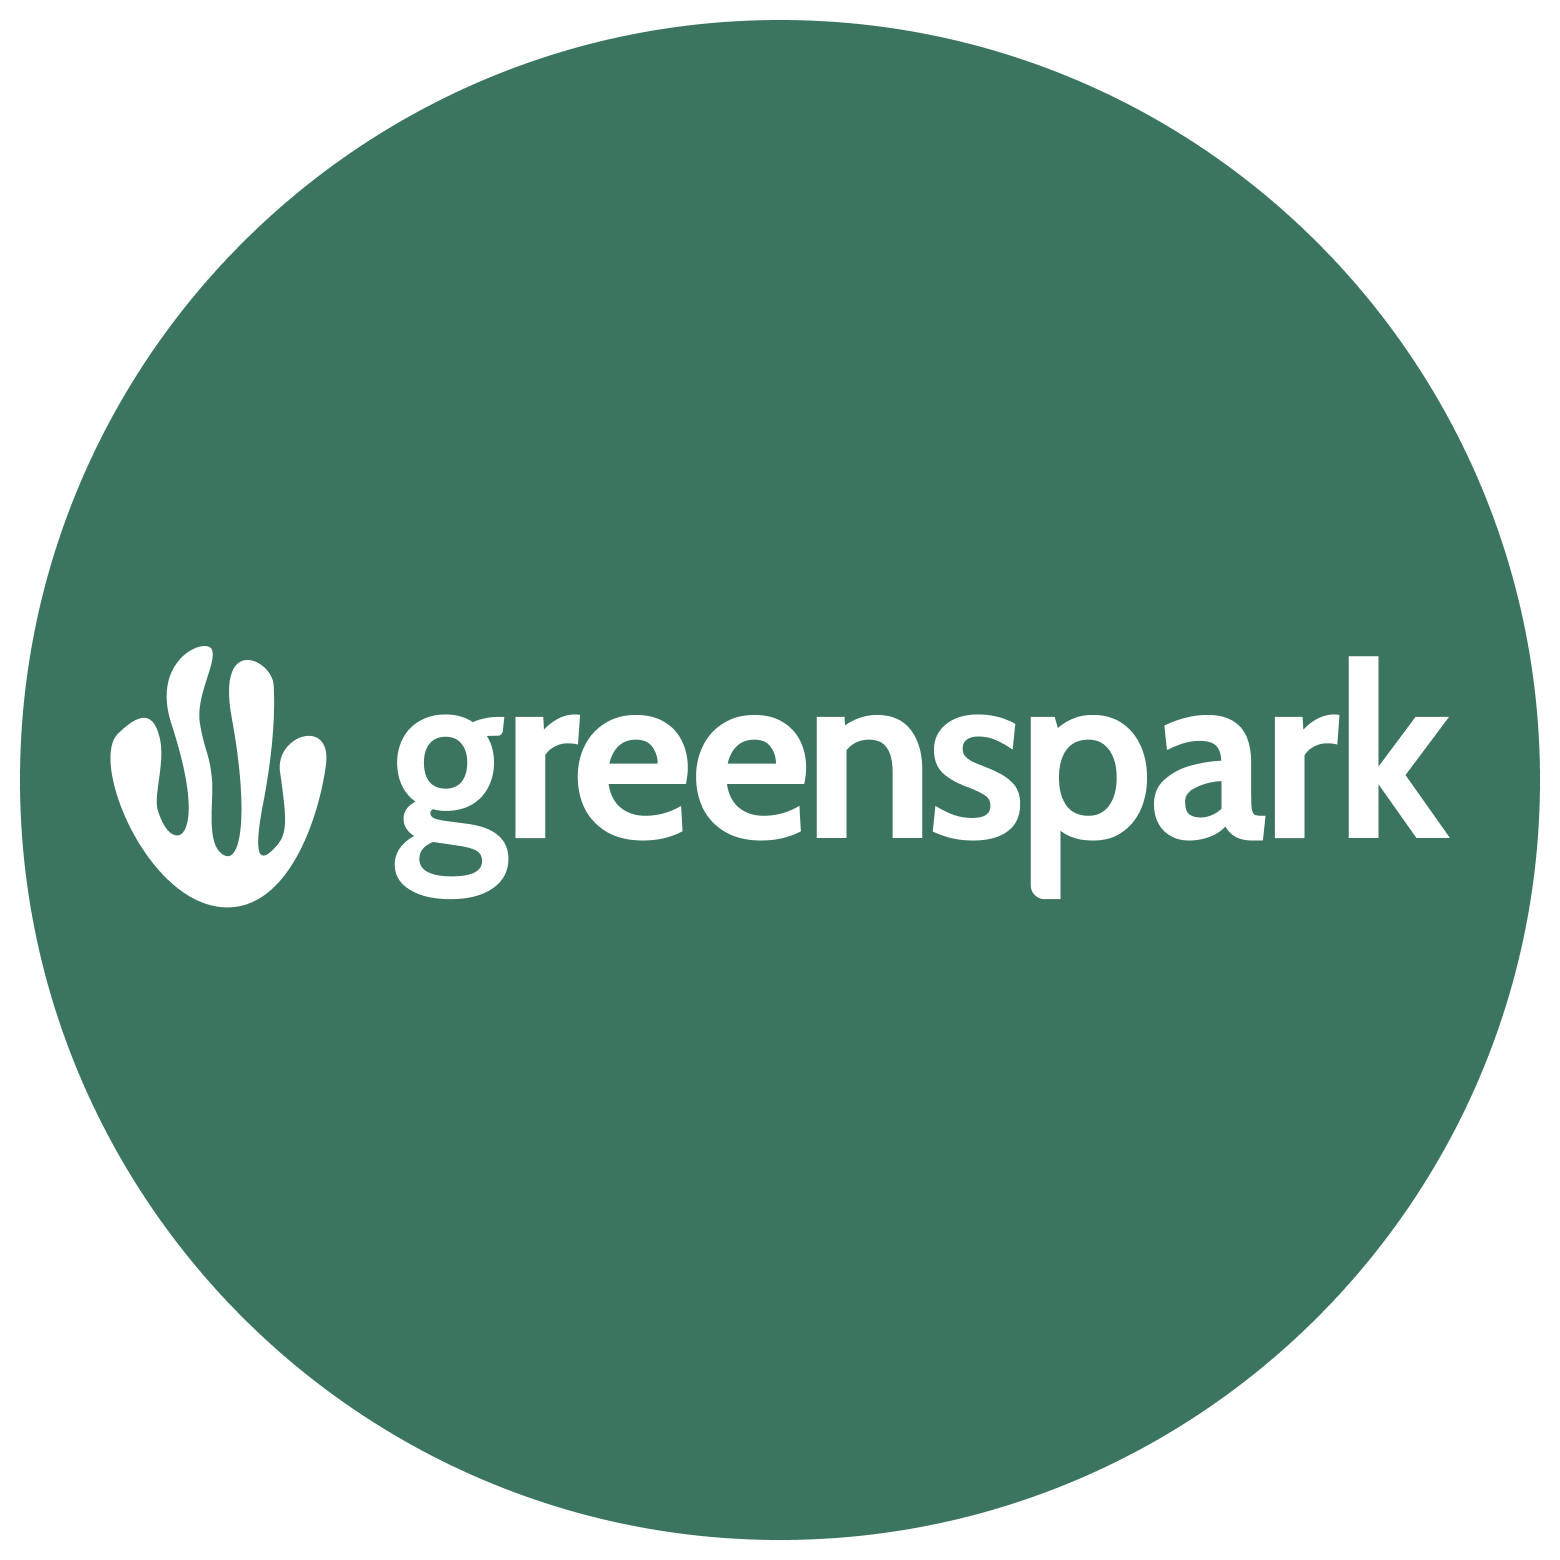 A luxury candle with the label "greenspark" on it, showcasing a minimalist design.